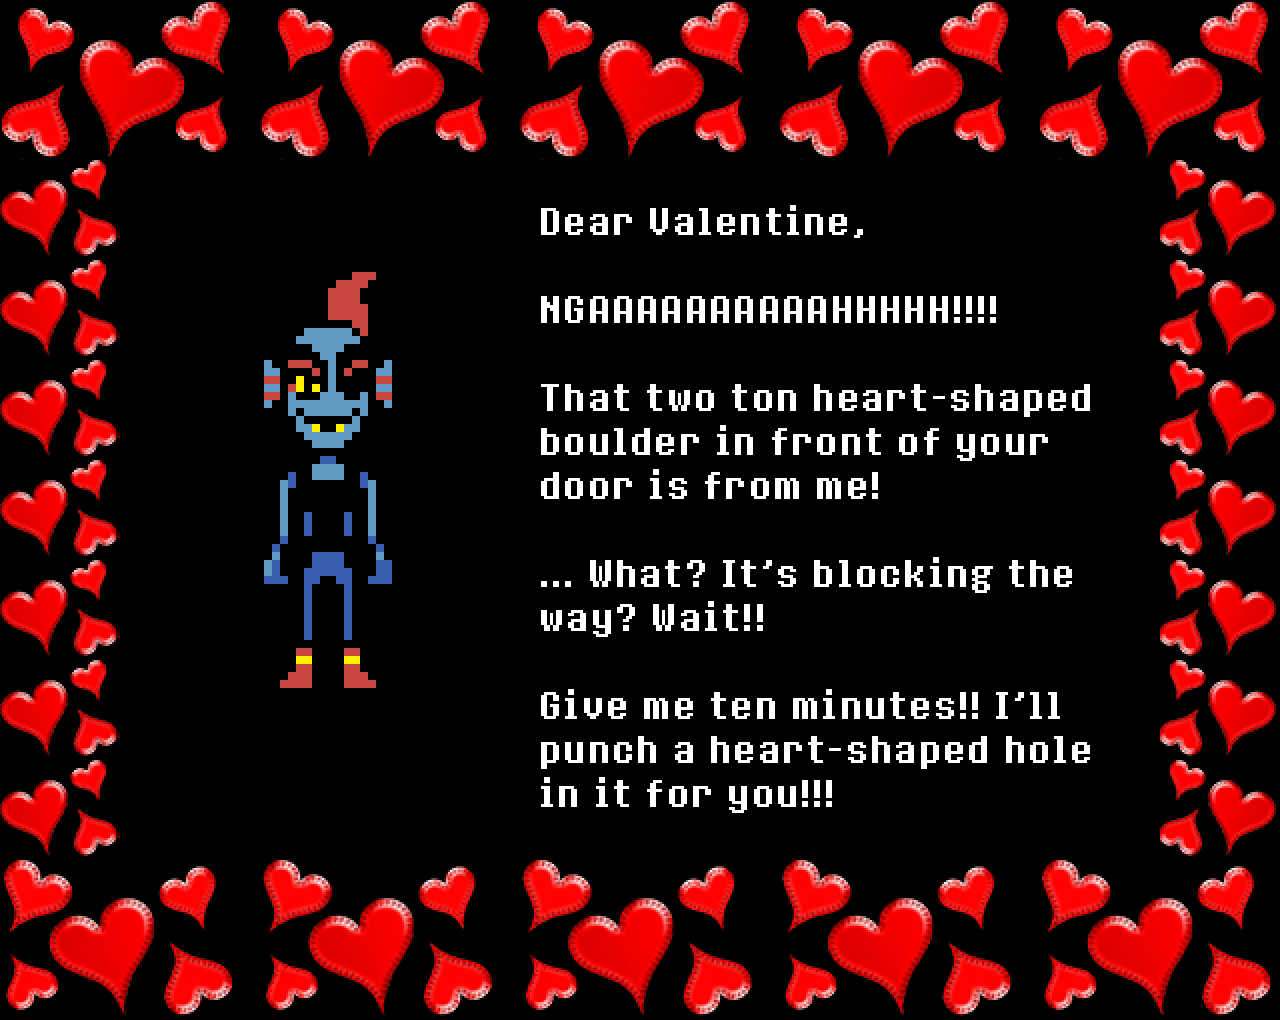 Undyne: Dear Valentine,

NGAAAAAAAAAAHHHHH!!!!

That two ton heart-shaped boulder in front of your door is from me!

… What? It’s blocking the way? Wait!!

Give me ten minutes!! I’ll punch a heart-shaped hole in it for you!!!